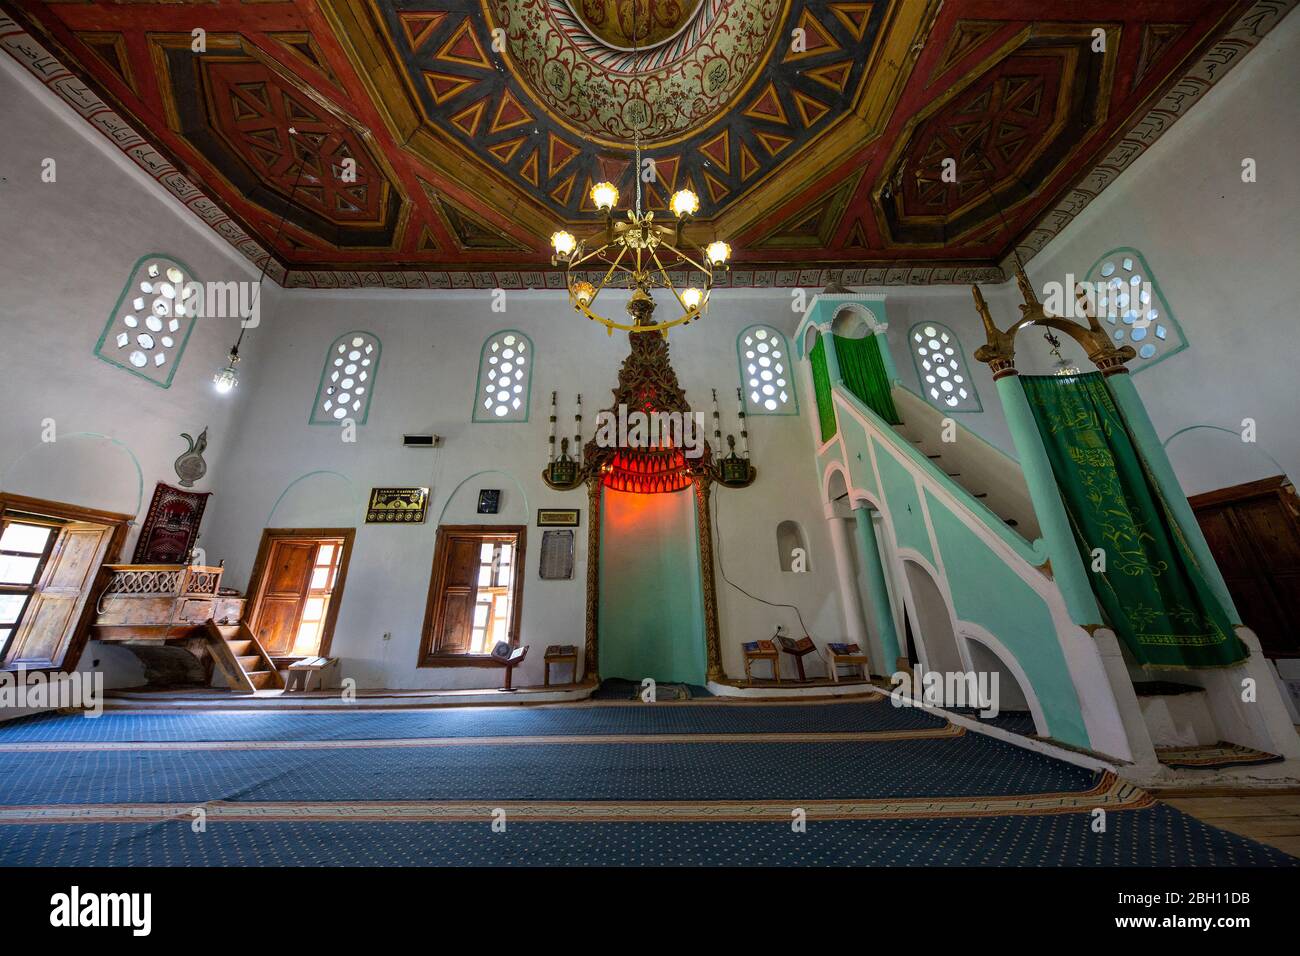 Prayer hall of the King Mosque known also as Sultan Mosque or Sultan Beyazit Mosque, in Berat, Albania Stock Photo